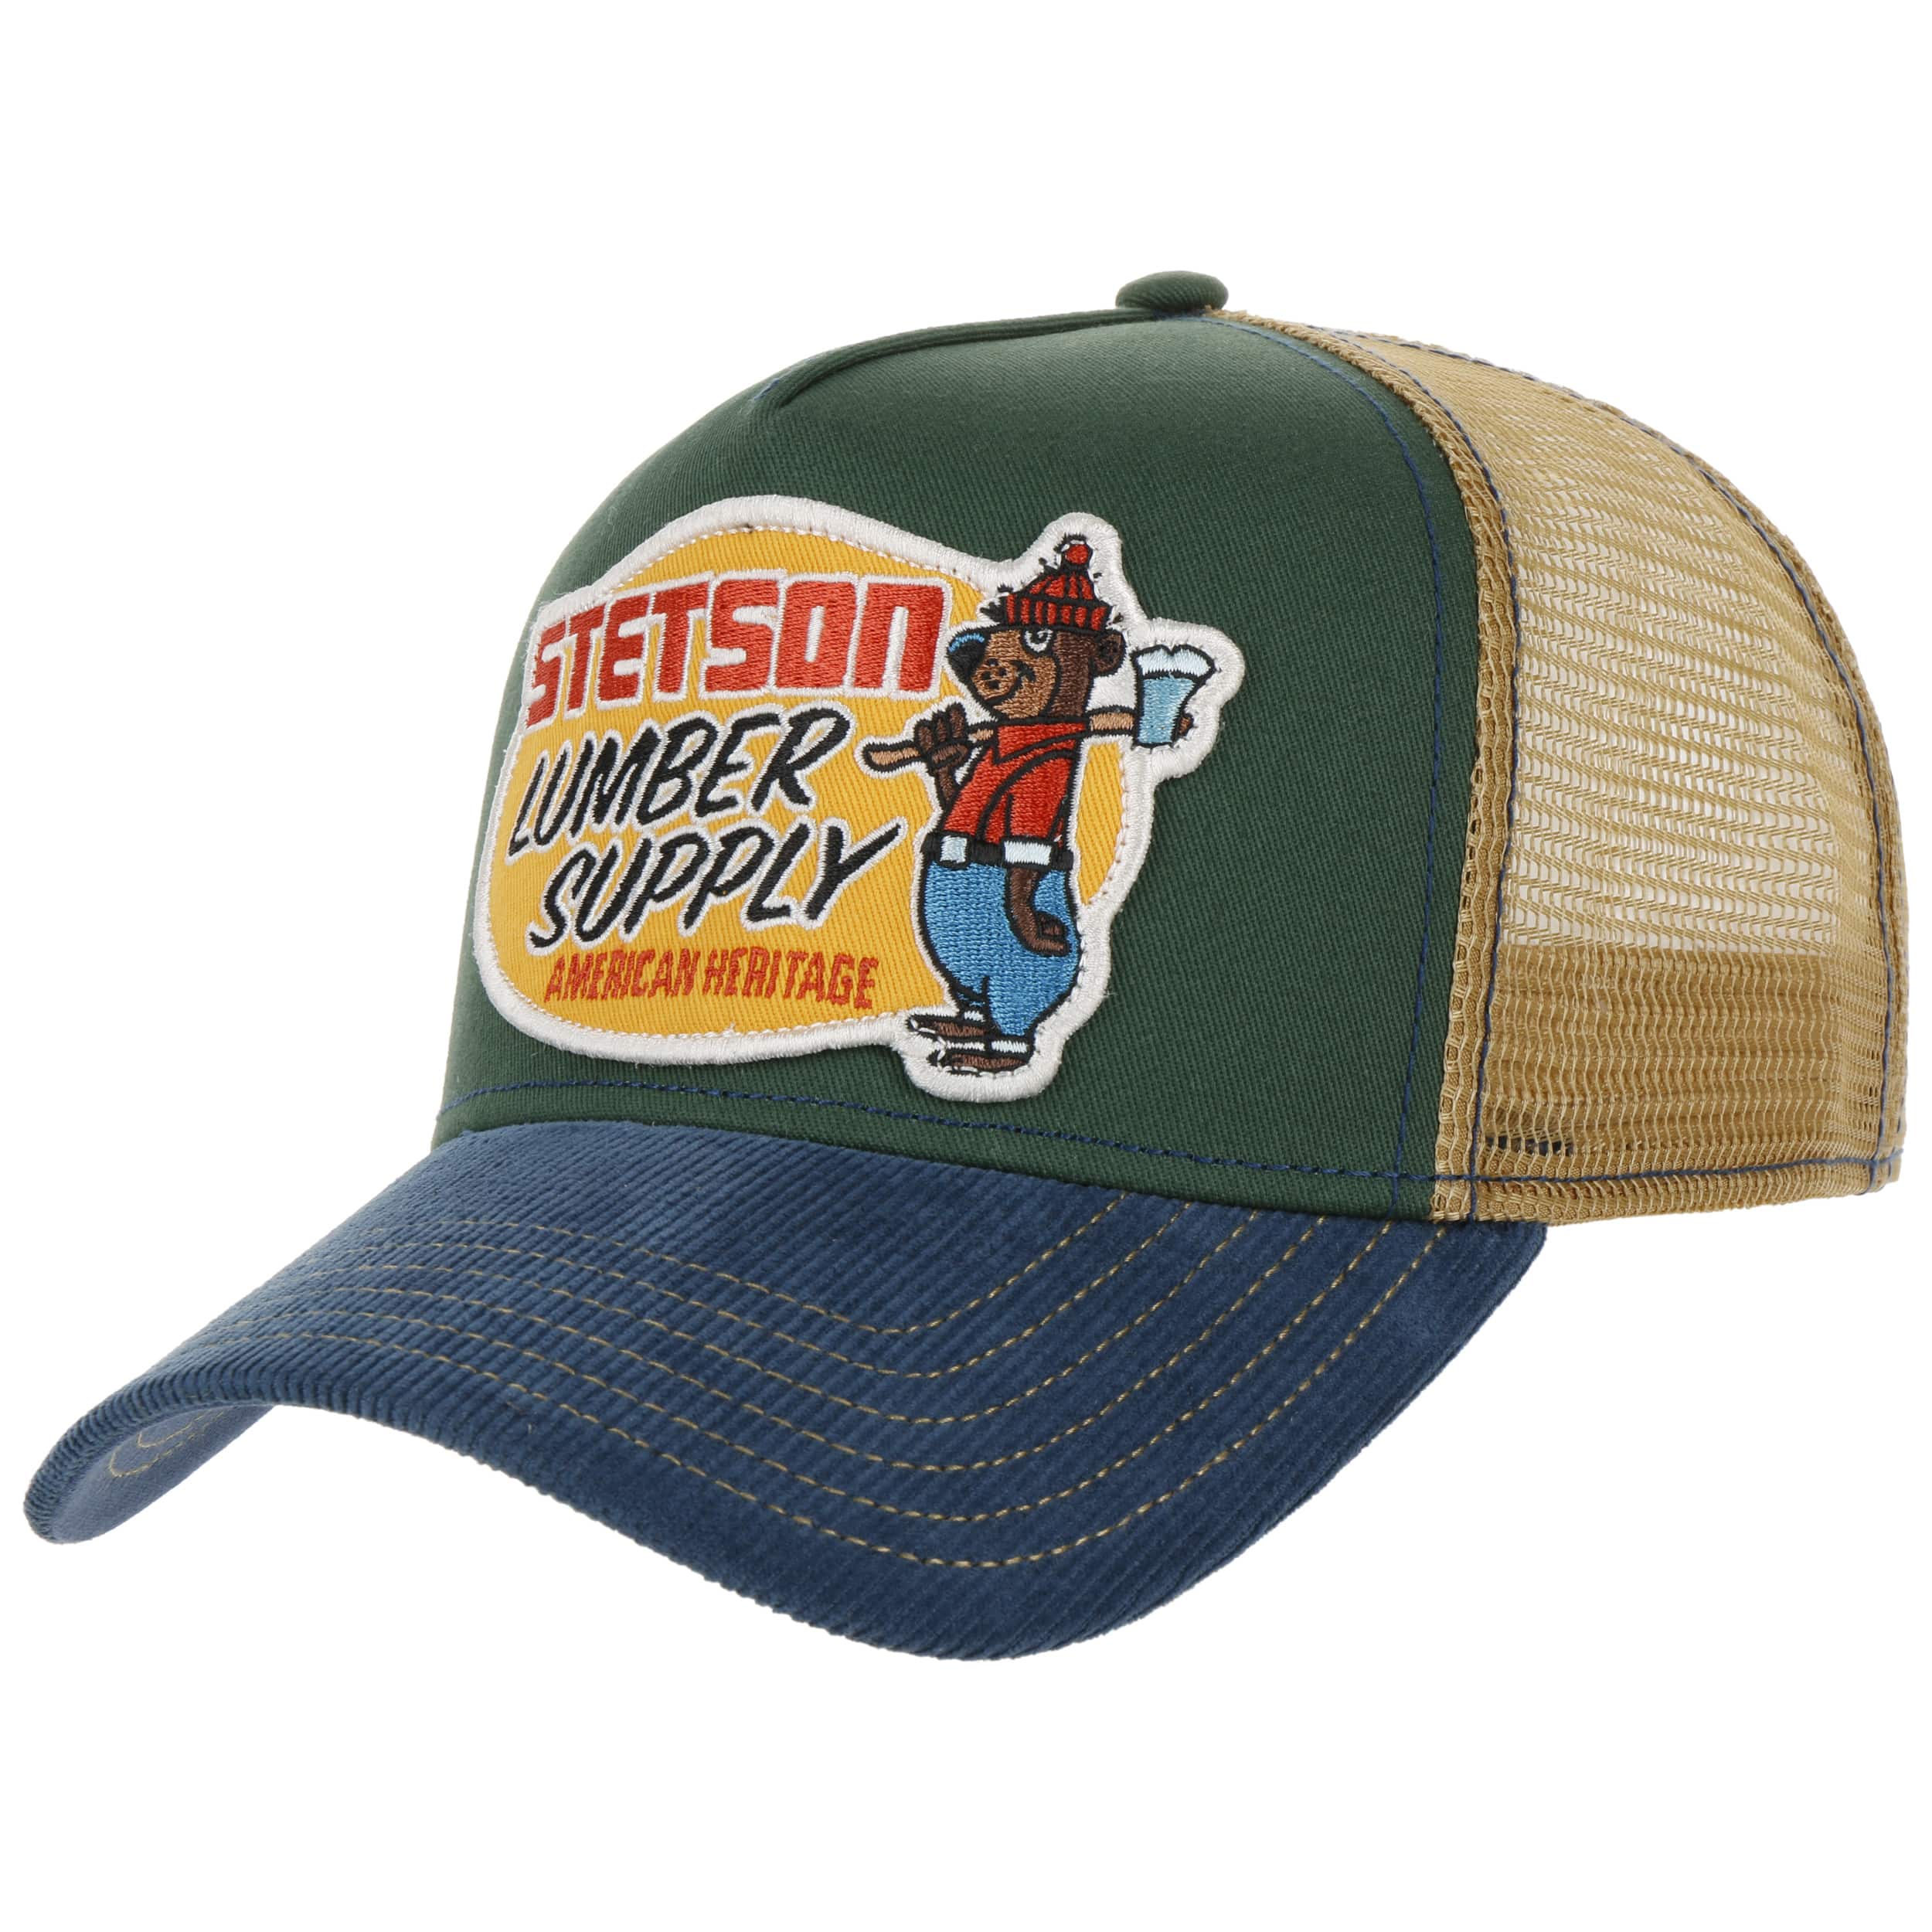 Casquette Plate Classic by Stetson - 49,00 €